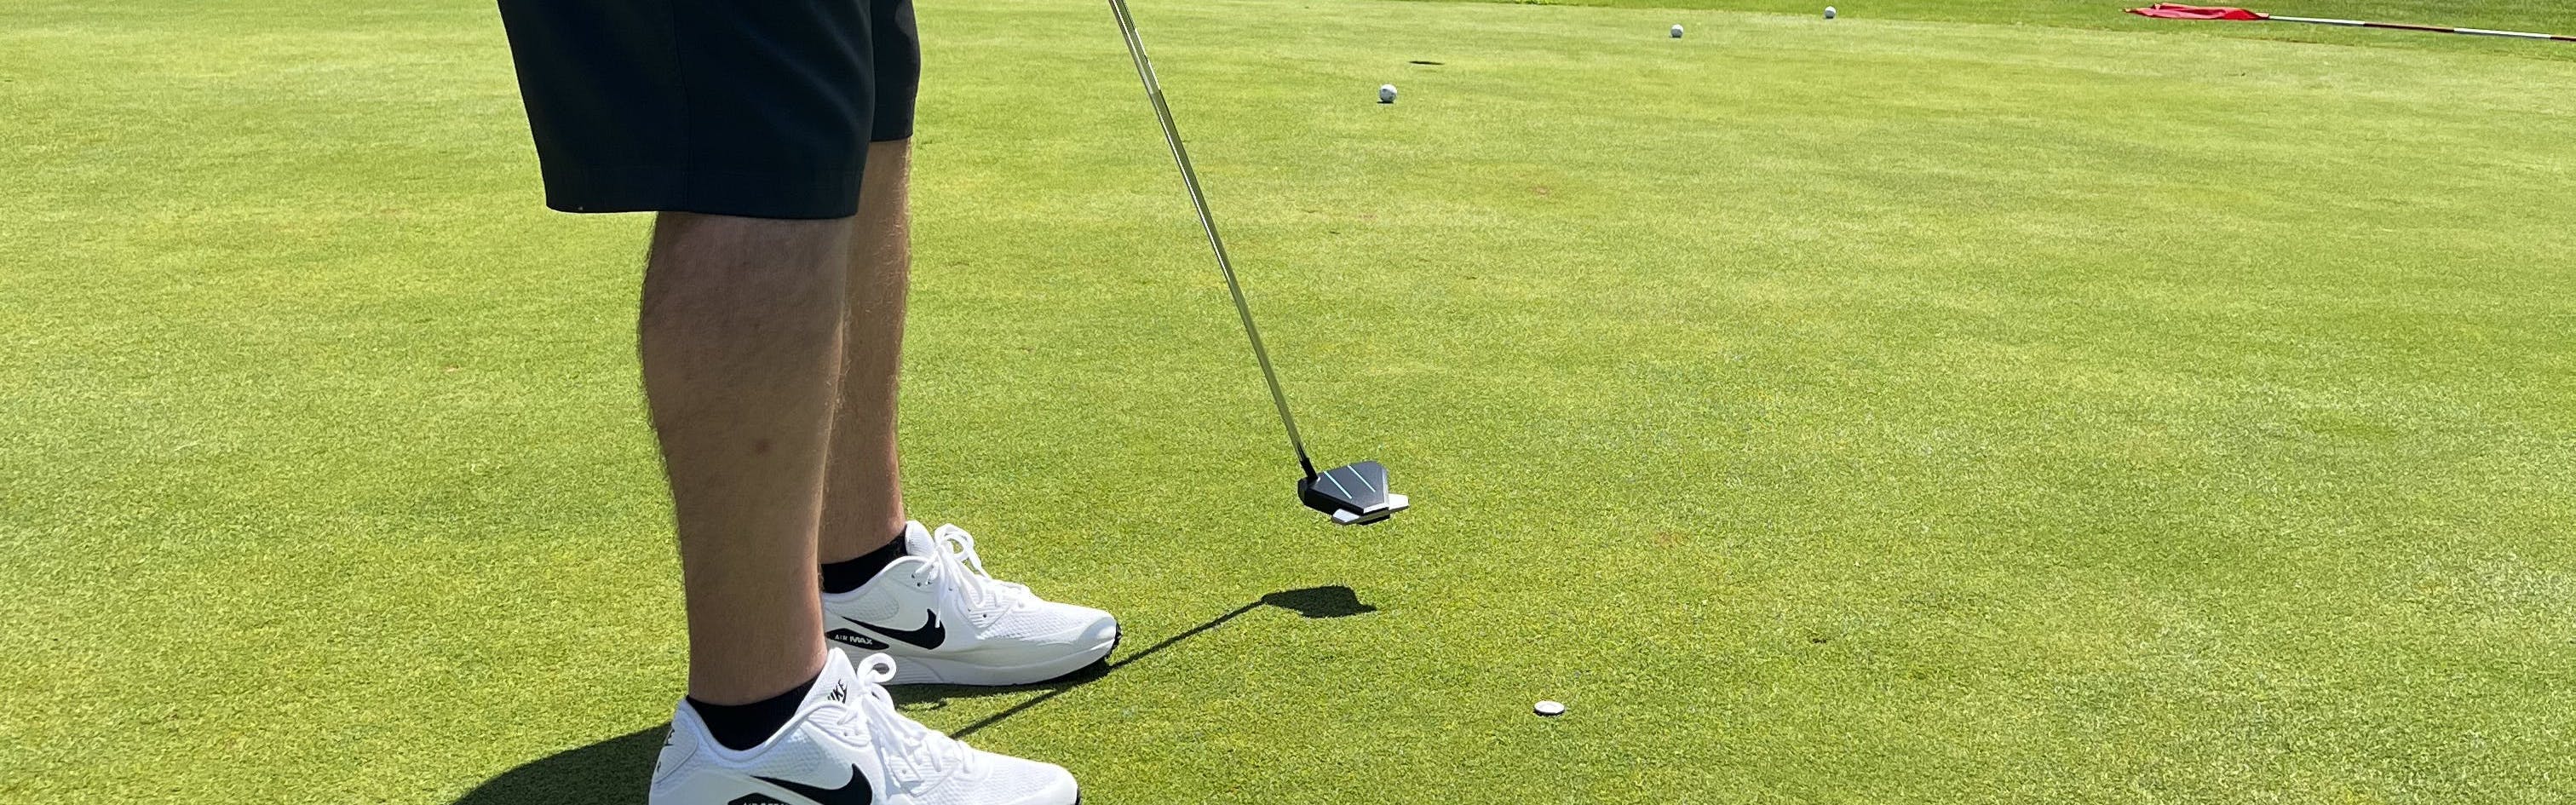 A man putting with the Indi Golf Jett Putter.